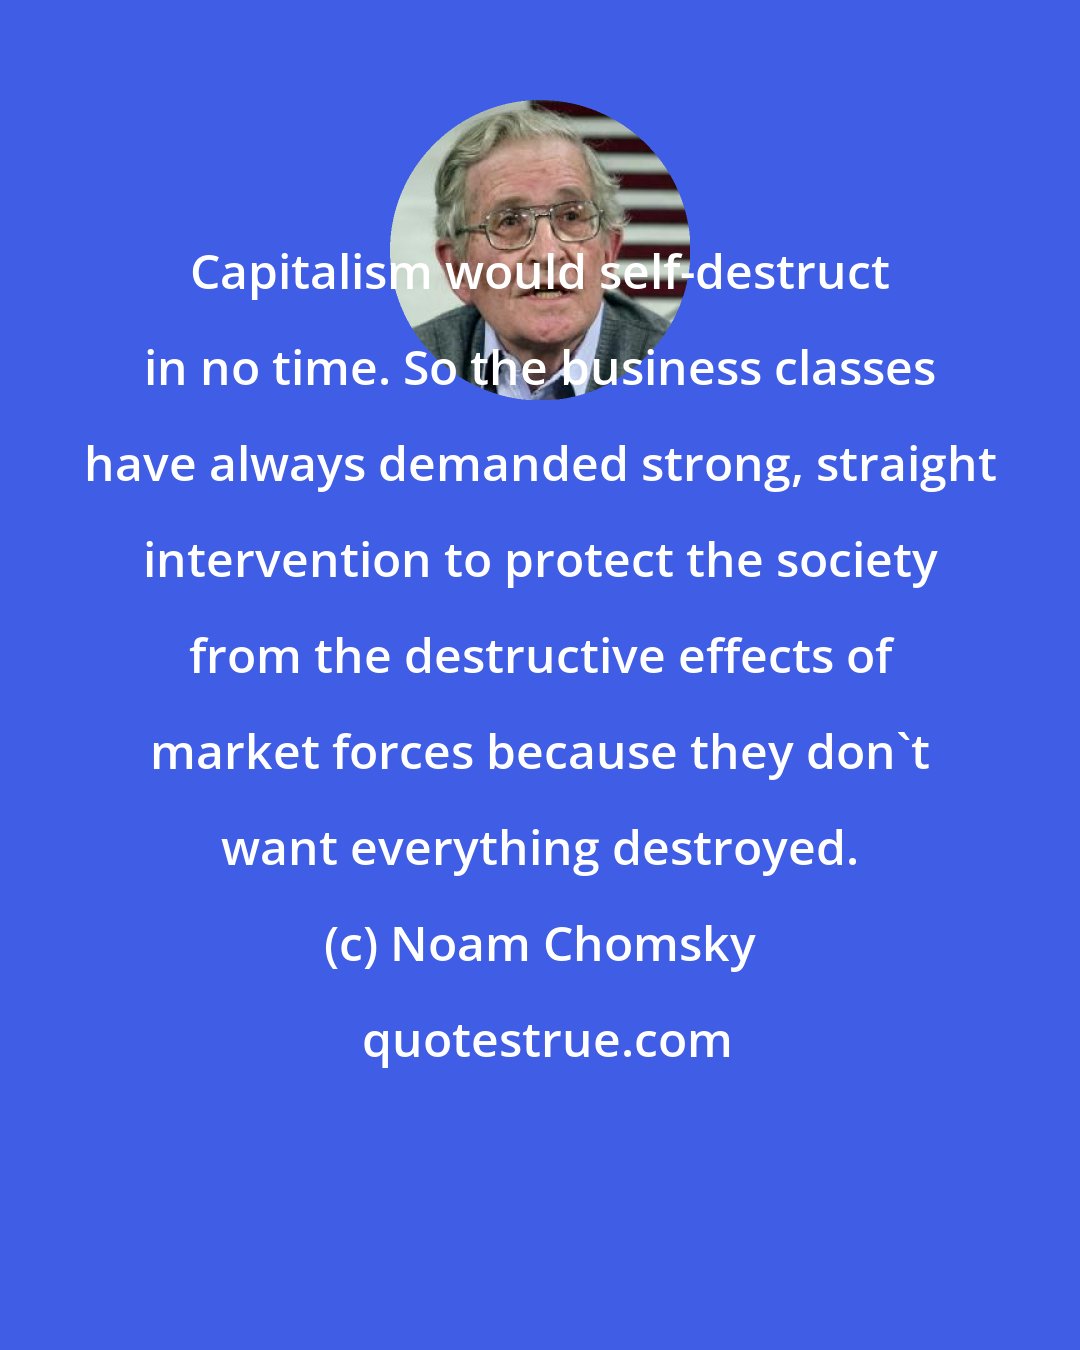 Noam Chomsky: Capitalism would self-destruct in no time. So the business classes have always demanded strong, straight intervention to protect the society from the destructive effects of market forces because they don't want everything destroyed.